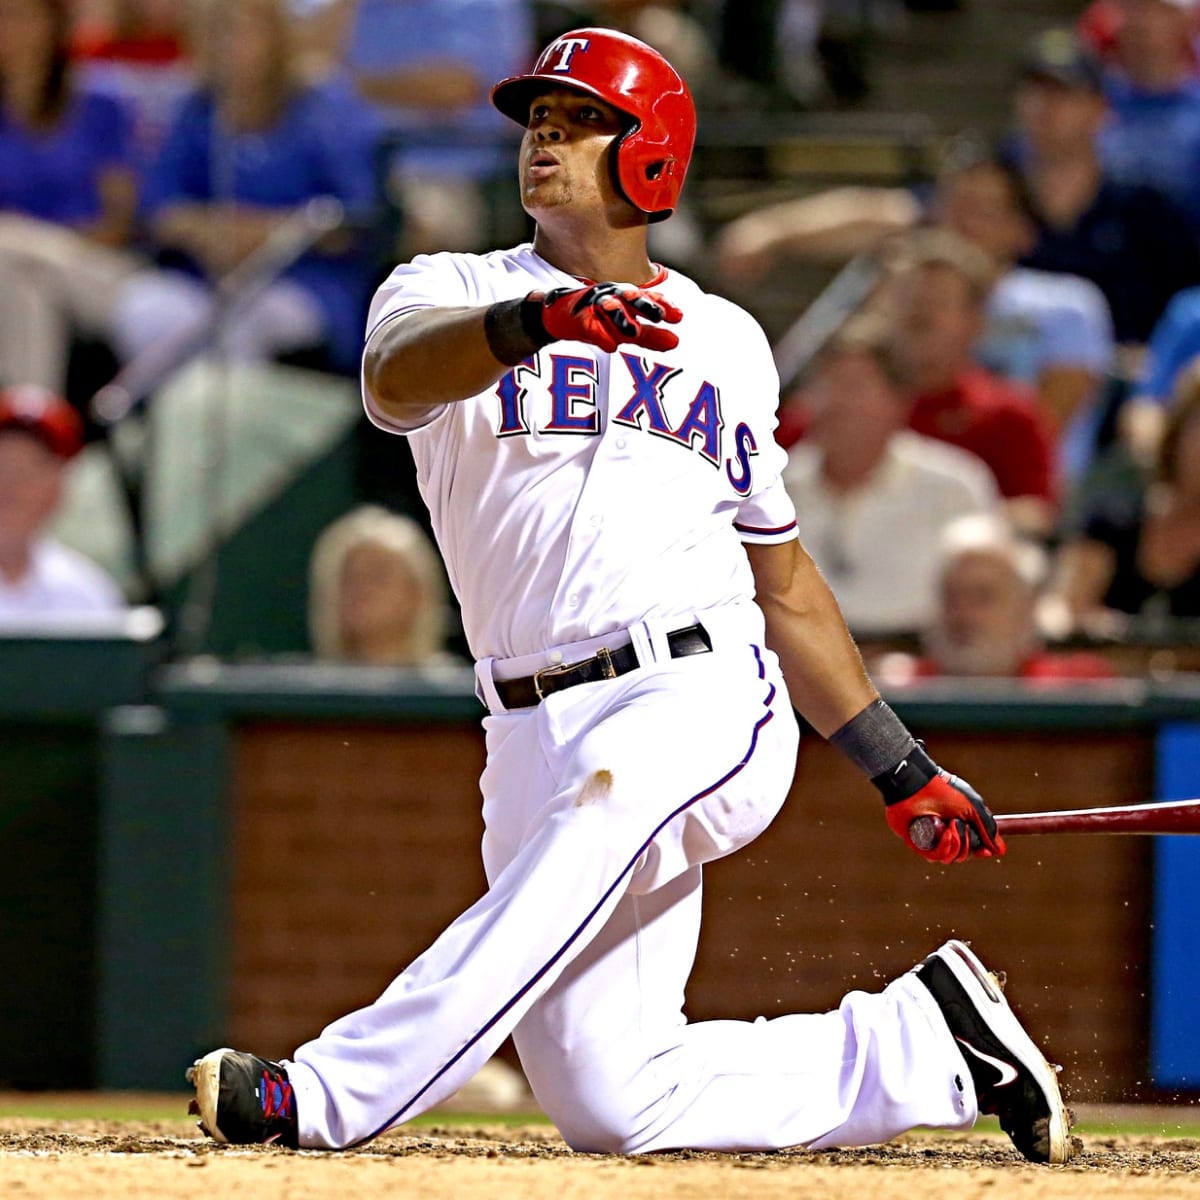 Free agent Adrian Beltre, Texas Rangers agree to 6-year deal - ESPN